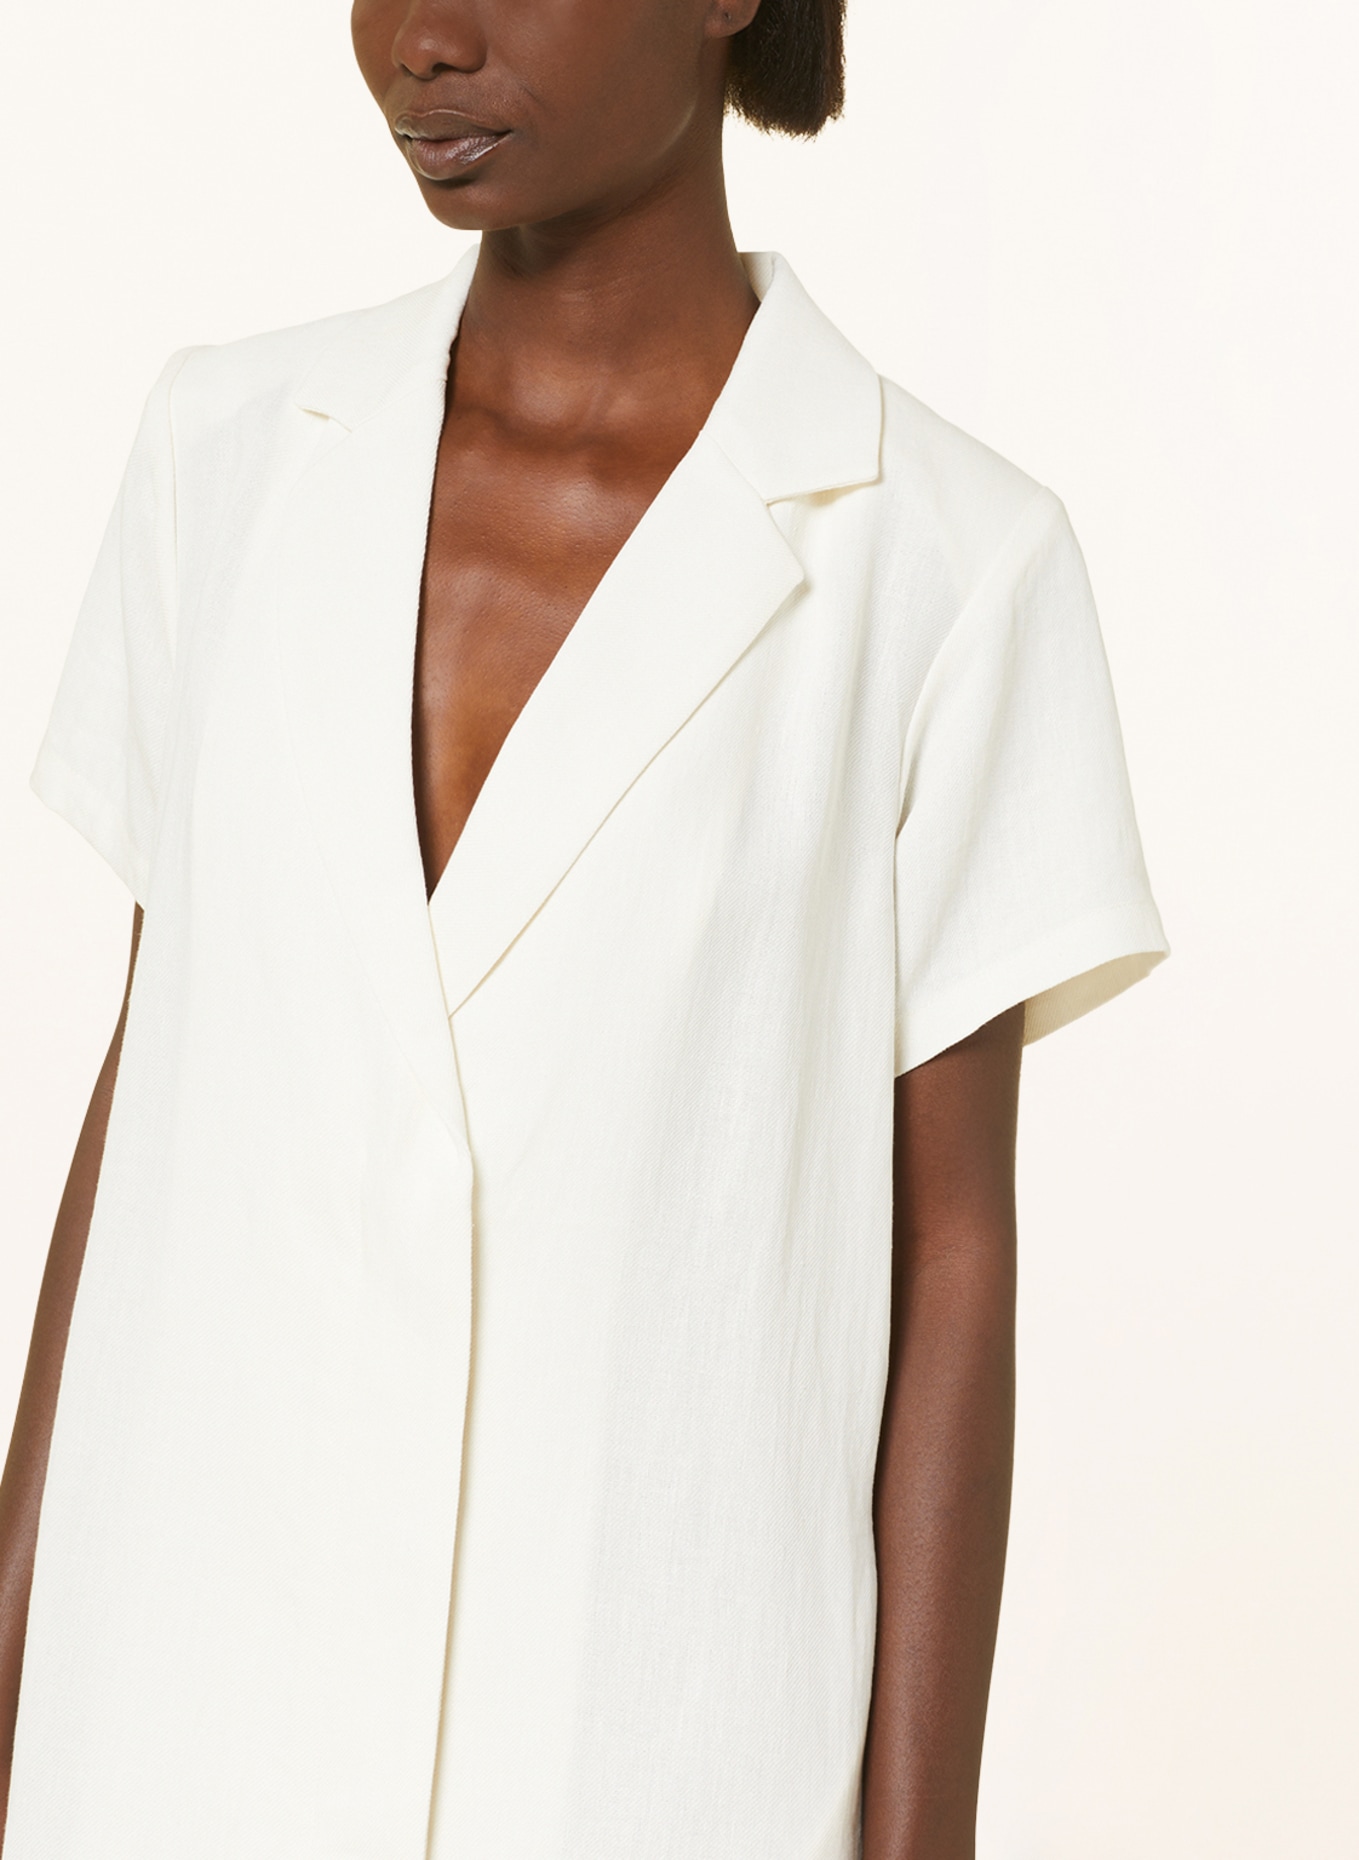 by Aylin Koenig Blazer dress BRITTANY with linen, Color: CREAM (Image 4)